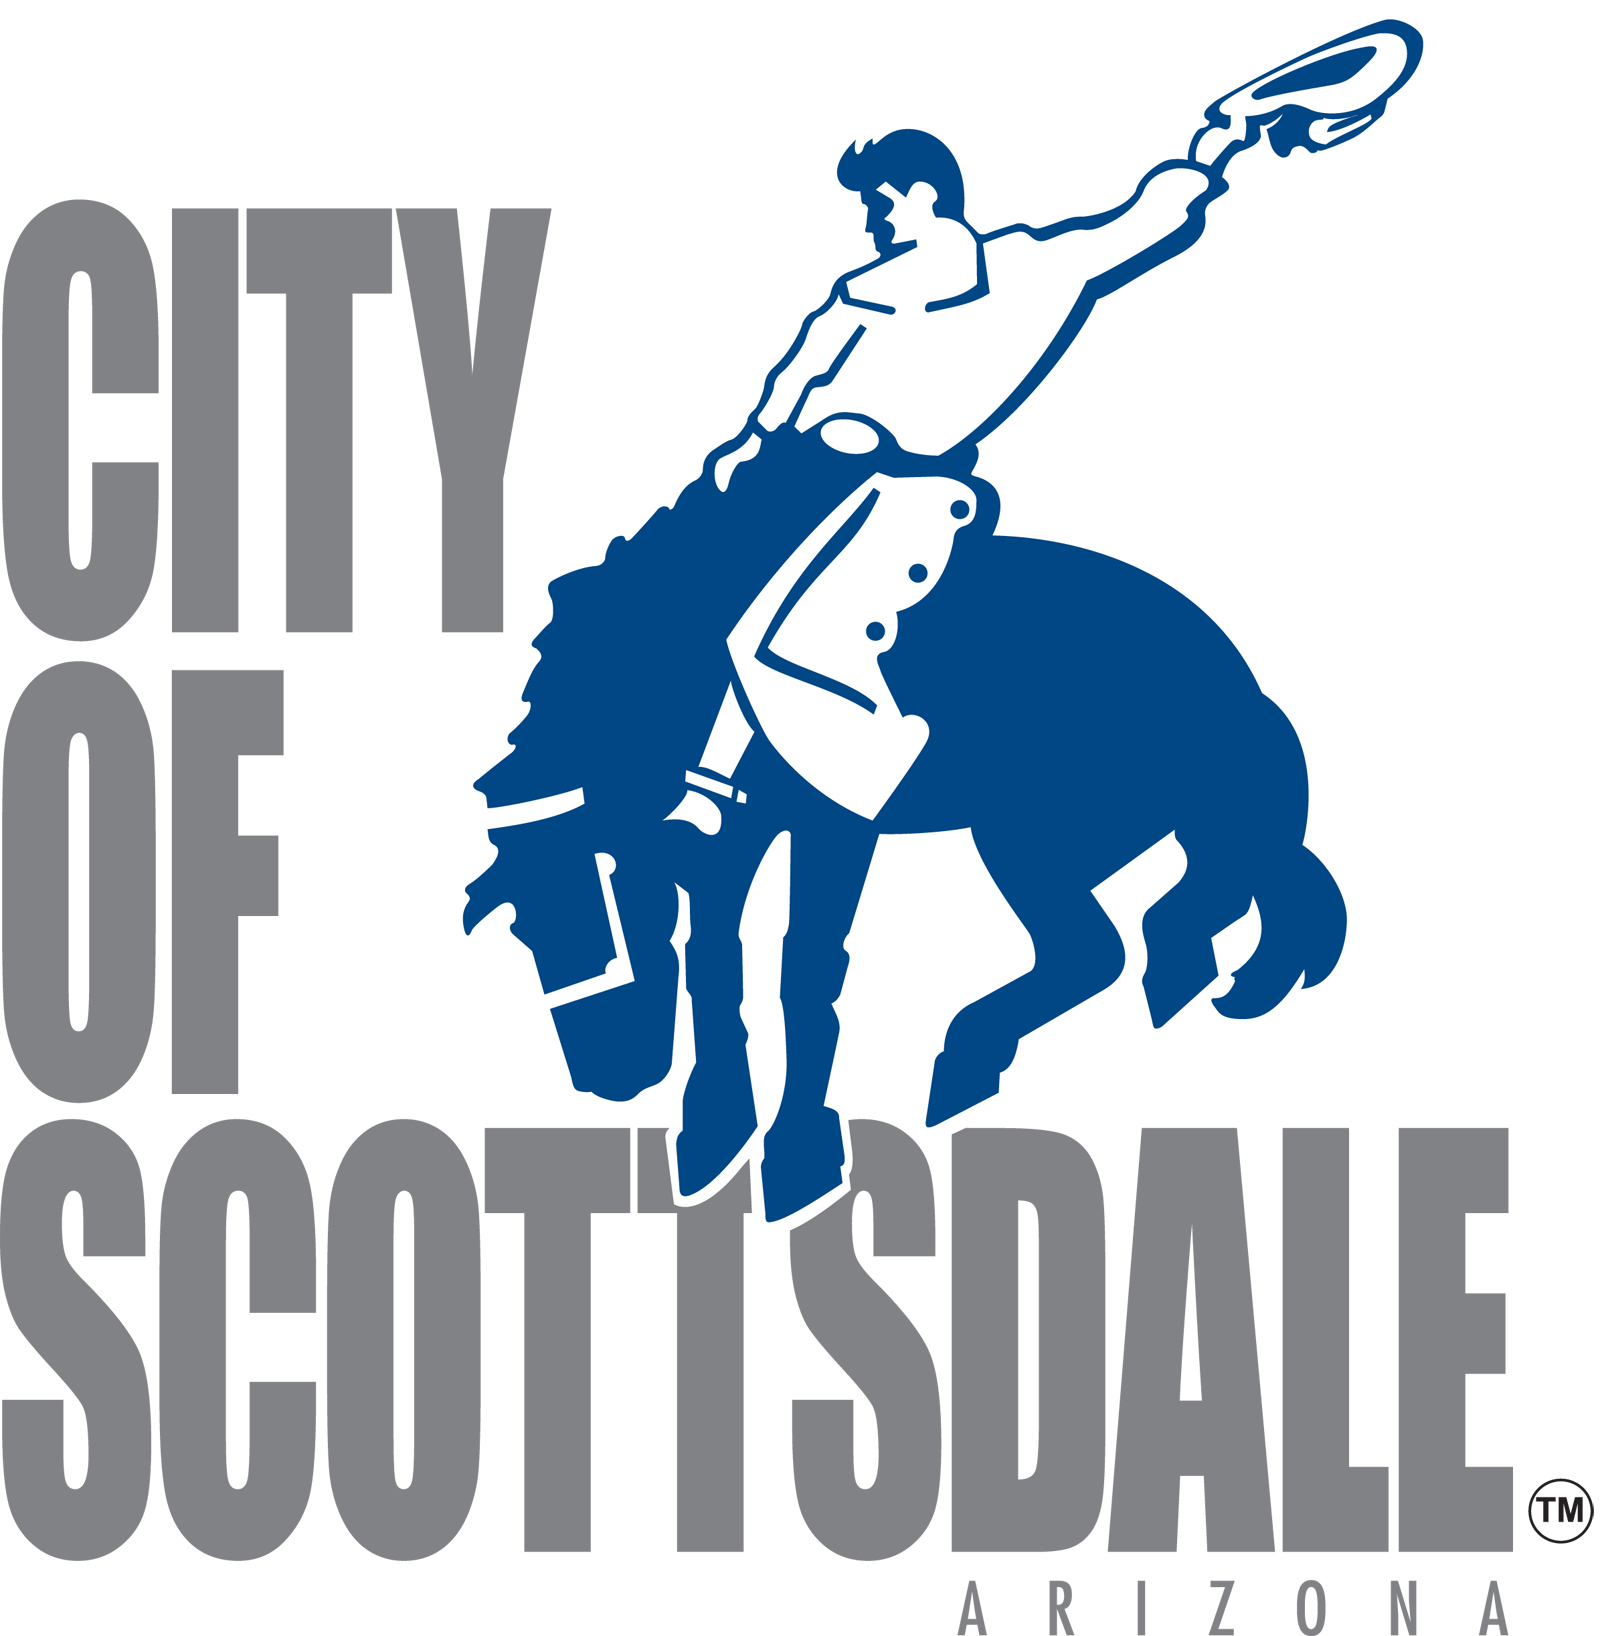 City of Scottsdale's Information Systems Department